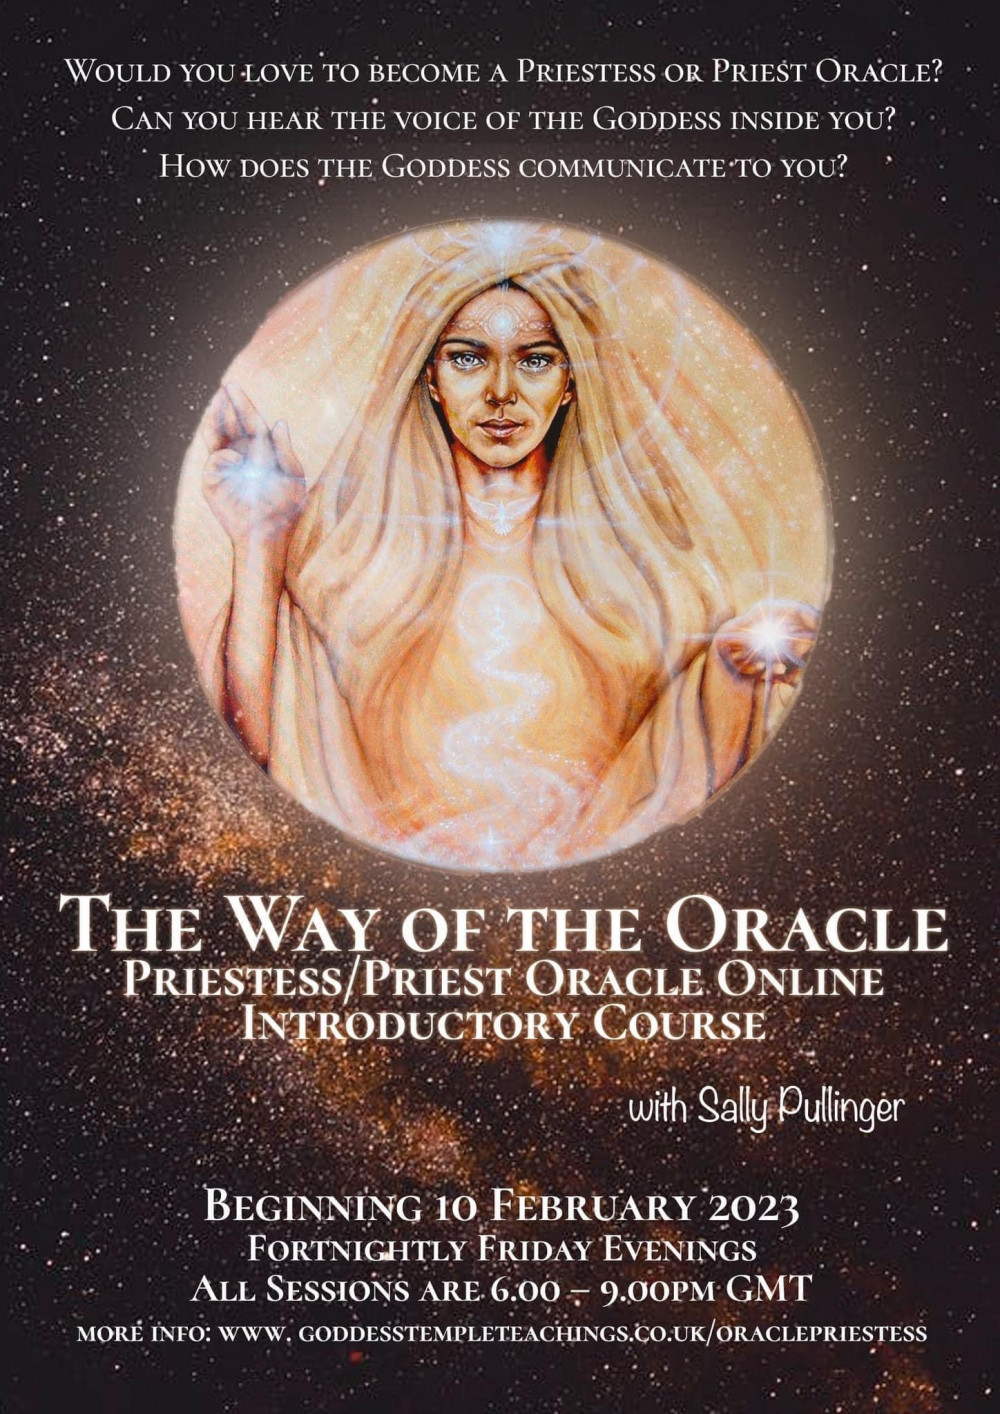 Would you love to become a priestess or priest oracle?